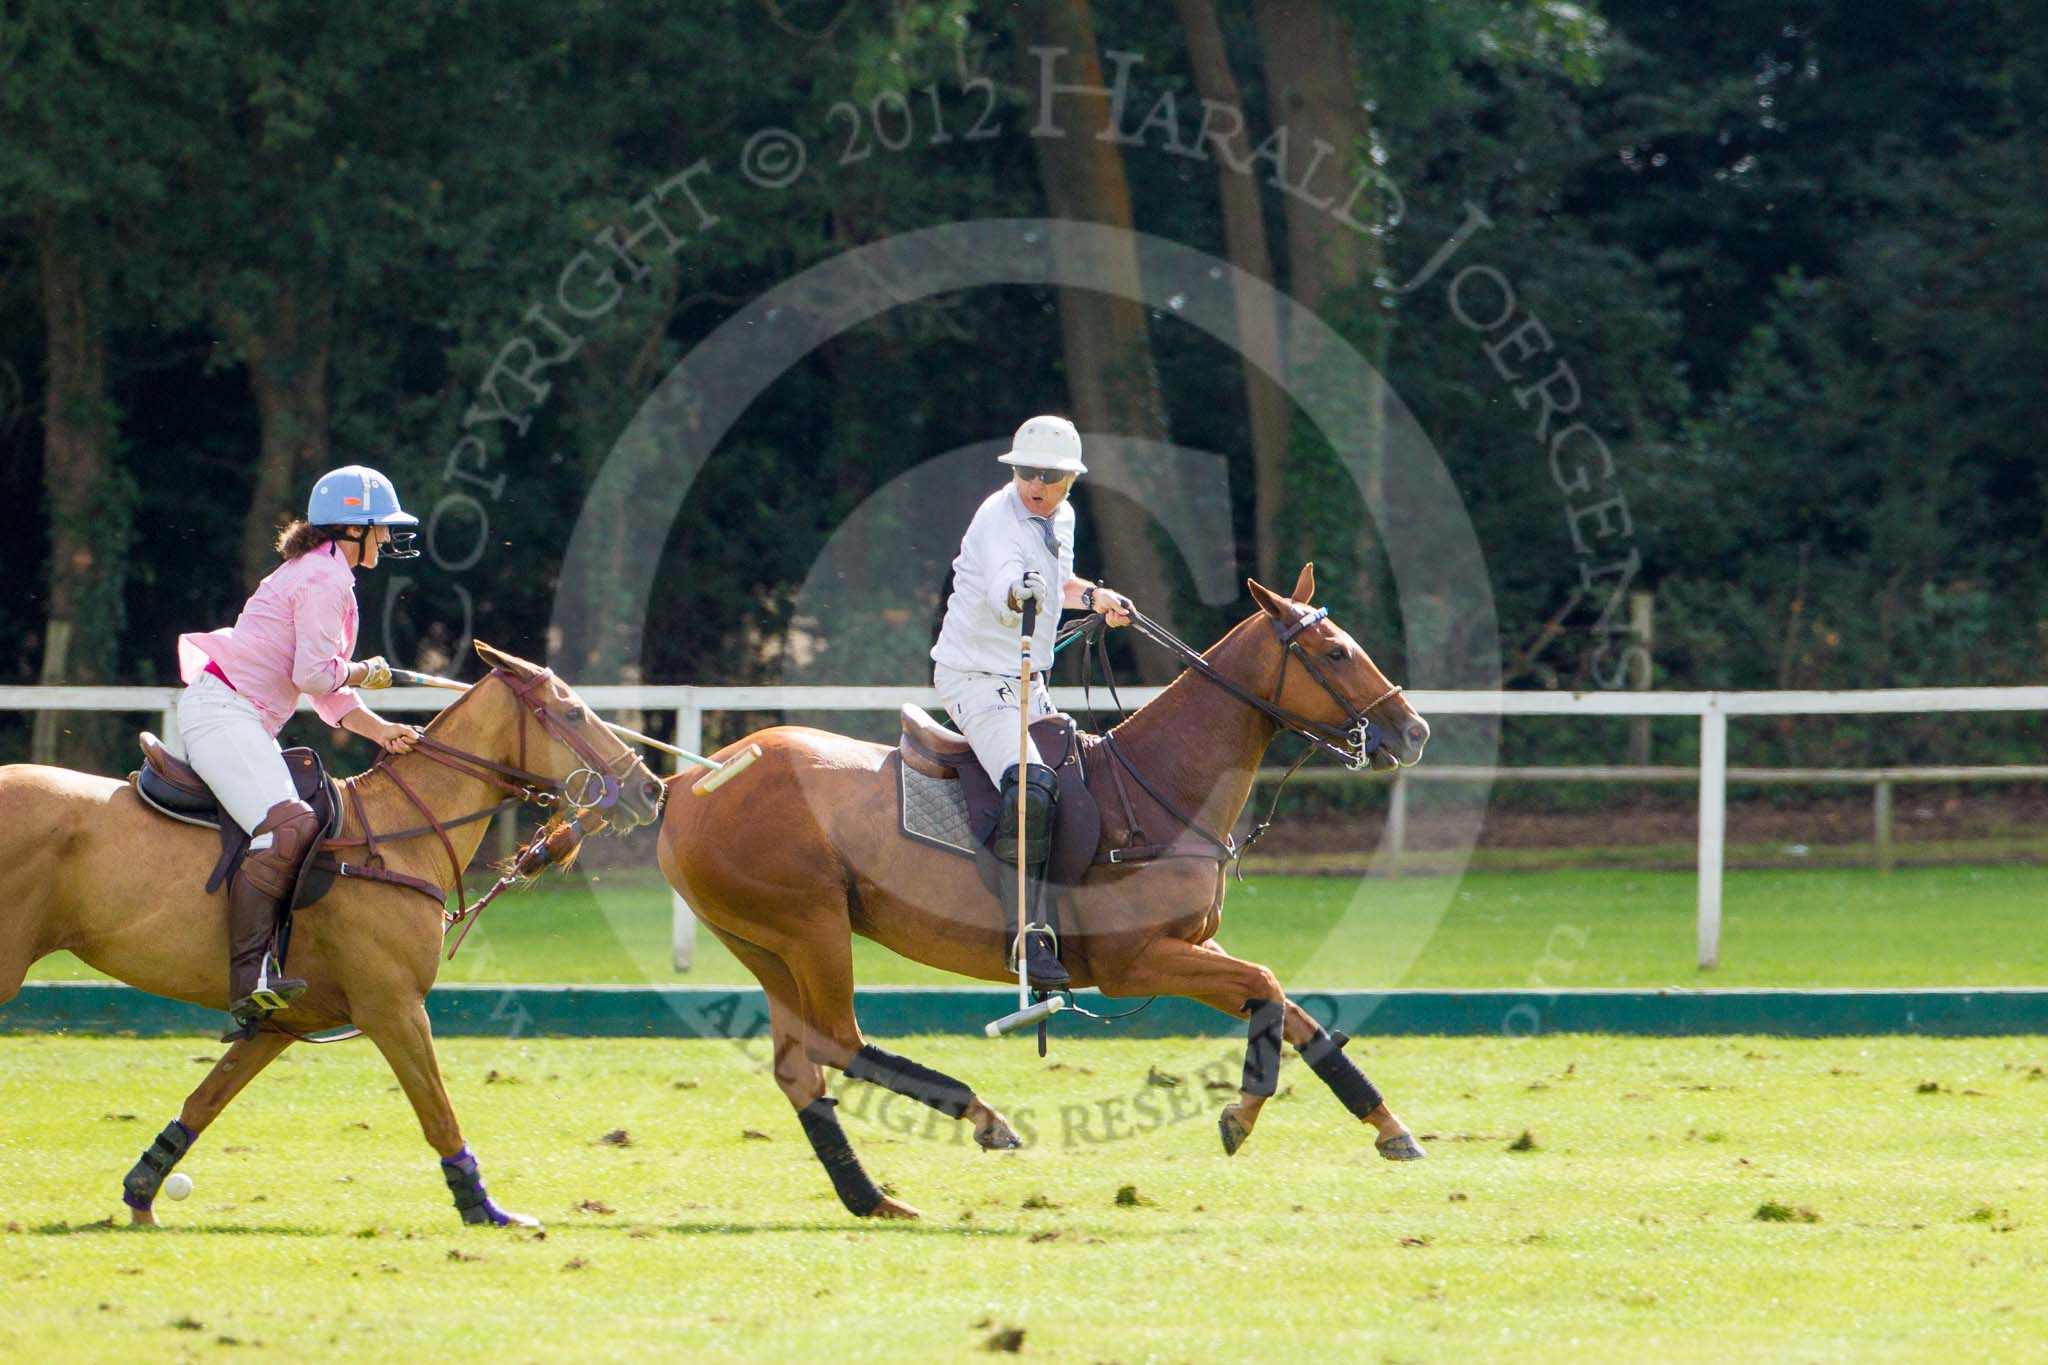 7th Heritage Polo Cup finals: La Golondrina Argentina Polo Patron Paul Oberschneider..
Hurtwood Park Polo Club,
Ewhurst Green,
Surrey,
United Kingdom,
on 05 August 2012 at 16:23, image #216